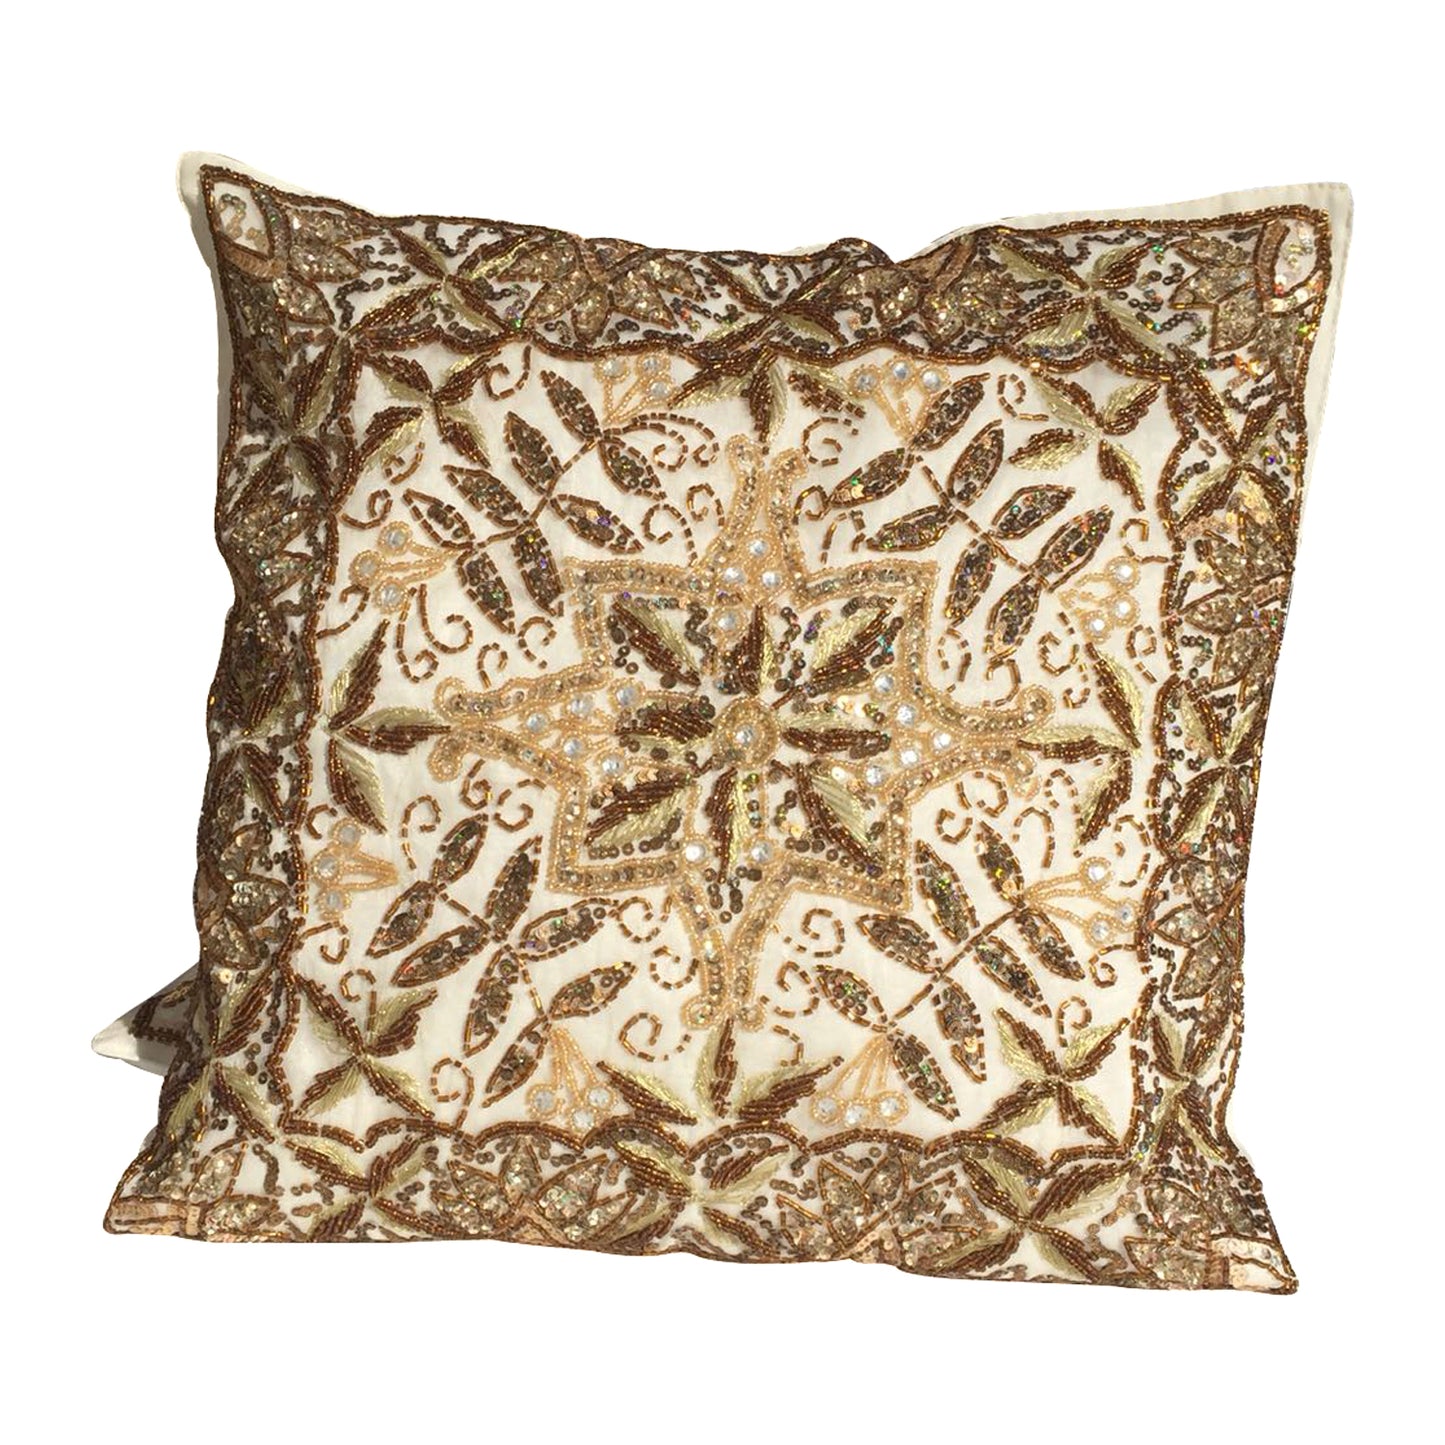 GiftBay Square Shape Set of 2 Throw Pillow Cushion Cover 16" x 16" with Pillow